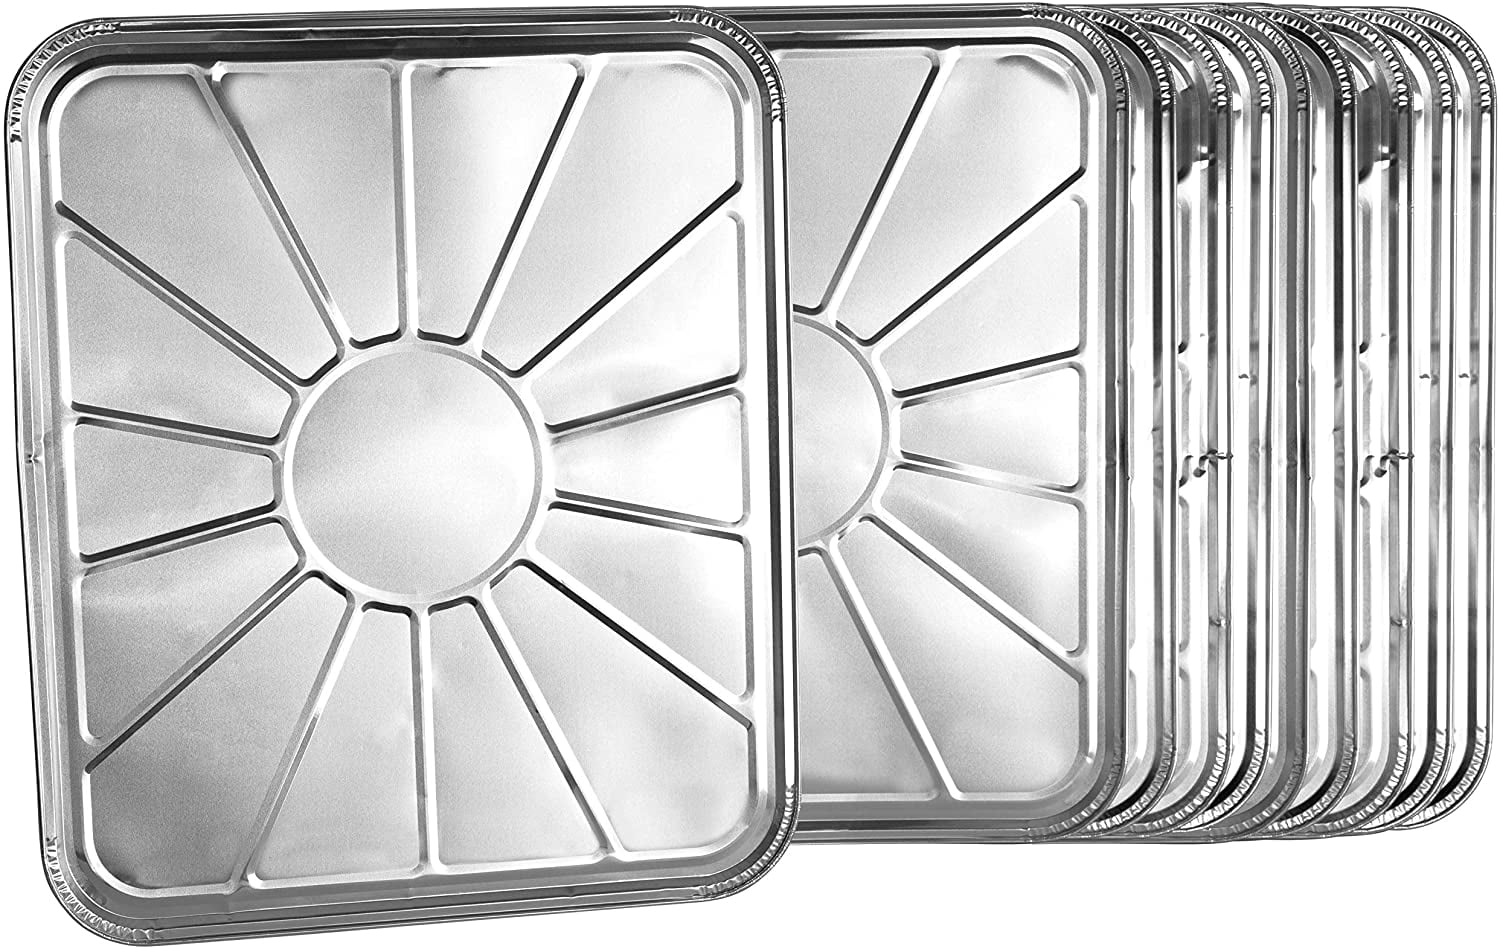 Stock Your Home Disposable Foil Oven Liners (10 Pack) Aluminum Foil Oven  Liners for Bottom of Electric Oven & Gas Oven, Reusable Oven Drip Pan Tray  for Cooking and Baking, Disposable Baking Mats: Home & Kitchen 